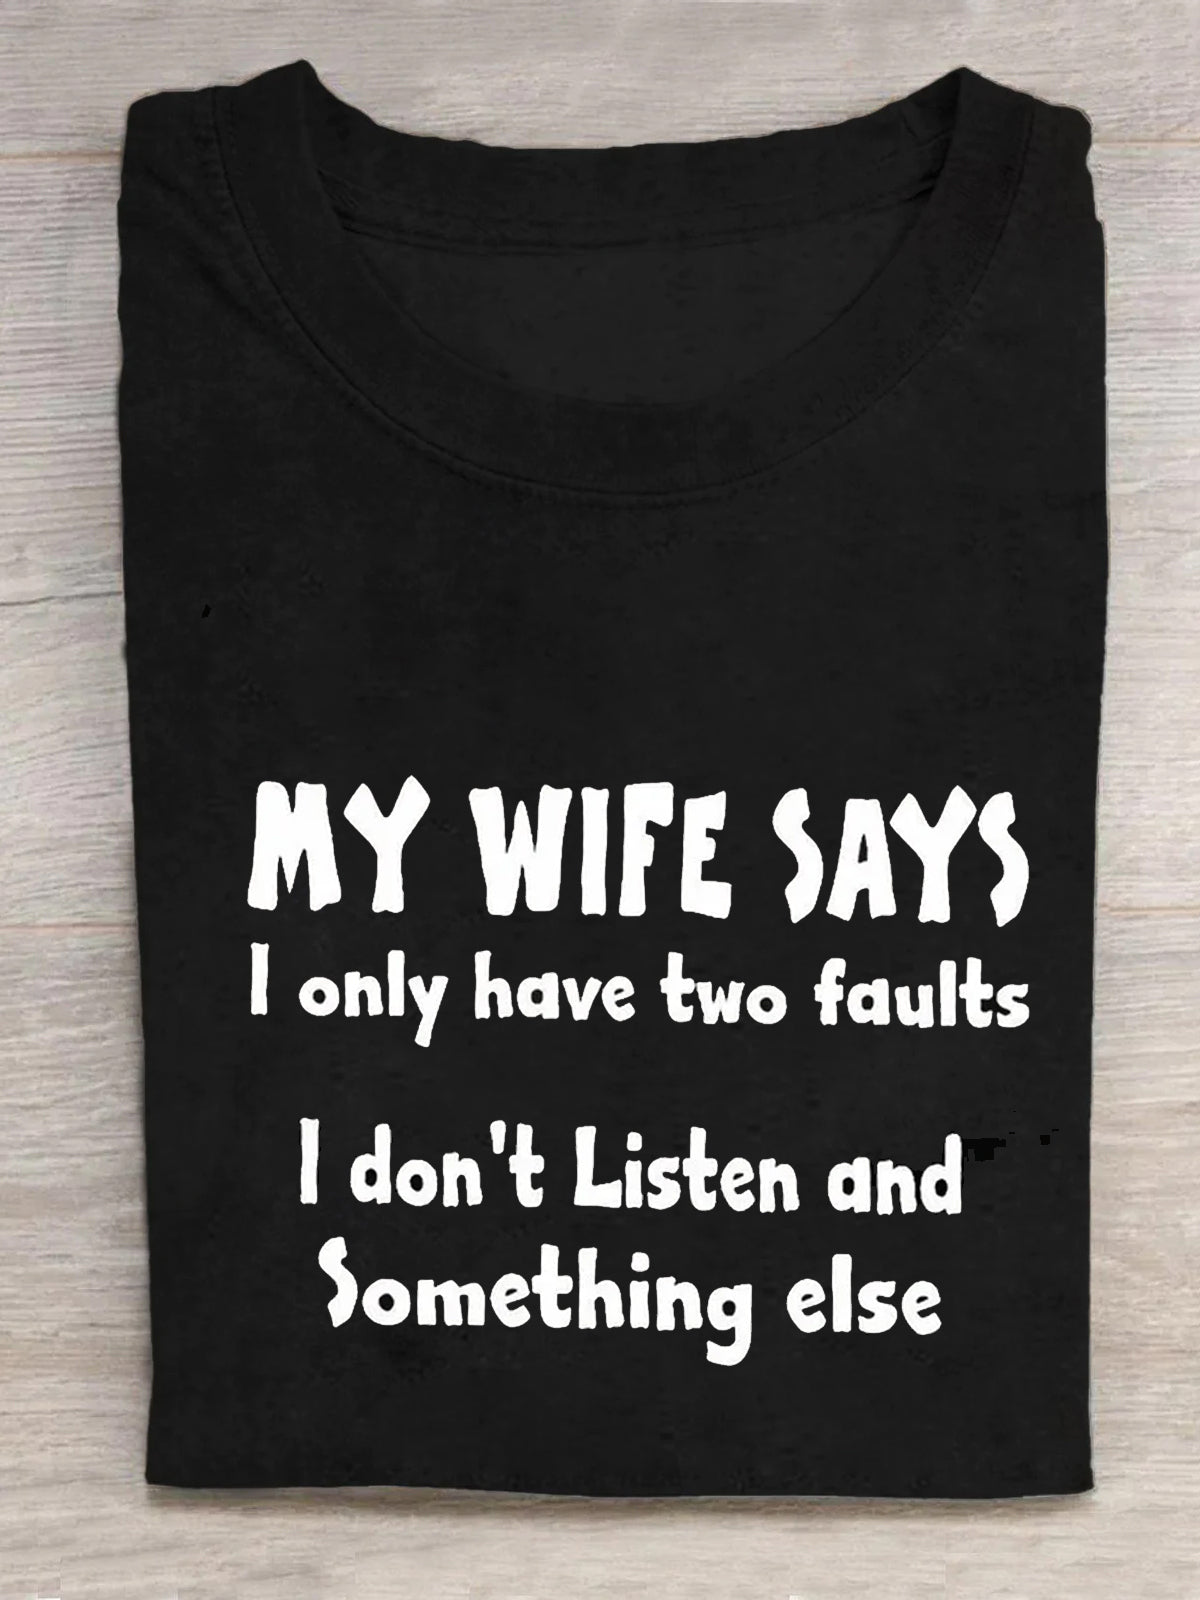 My Wife Says I Only Have Two Faults Round Neck Short Sleeve Men's T-shirt